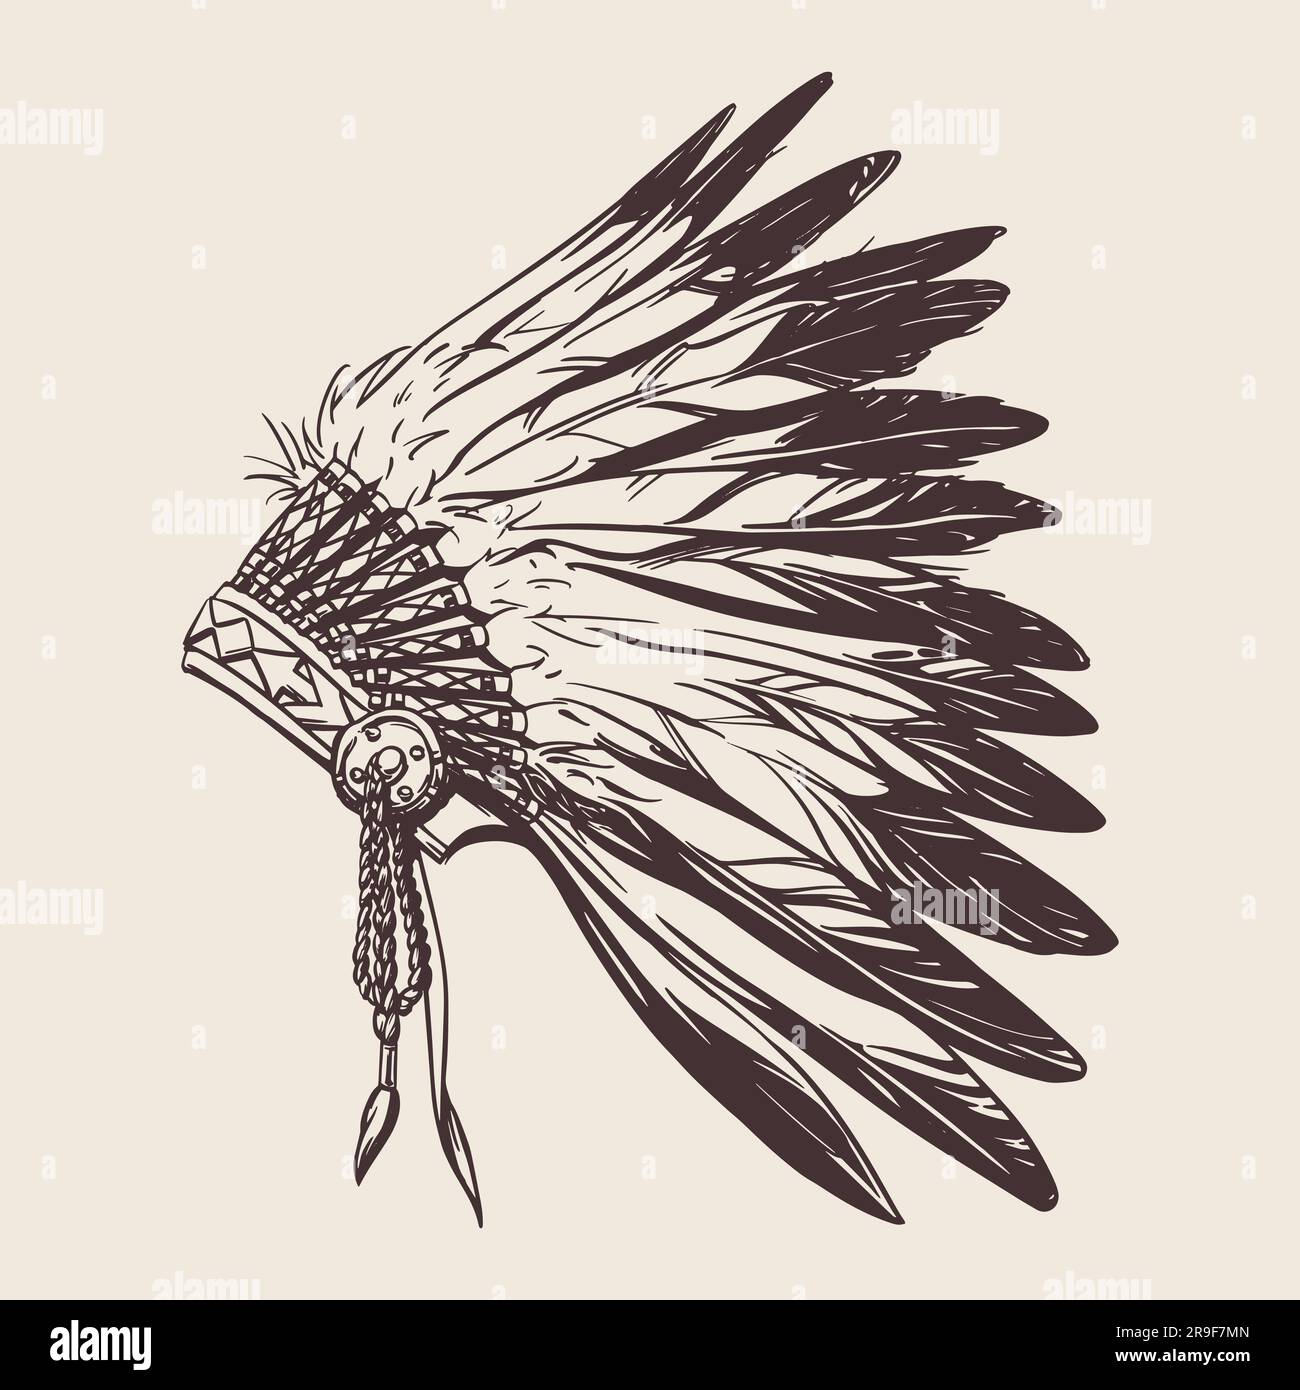 Headdress of indian chiefs in hand drow style for print and design. Vector illustration. Stock Vector